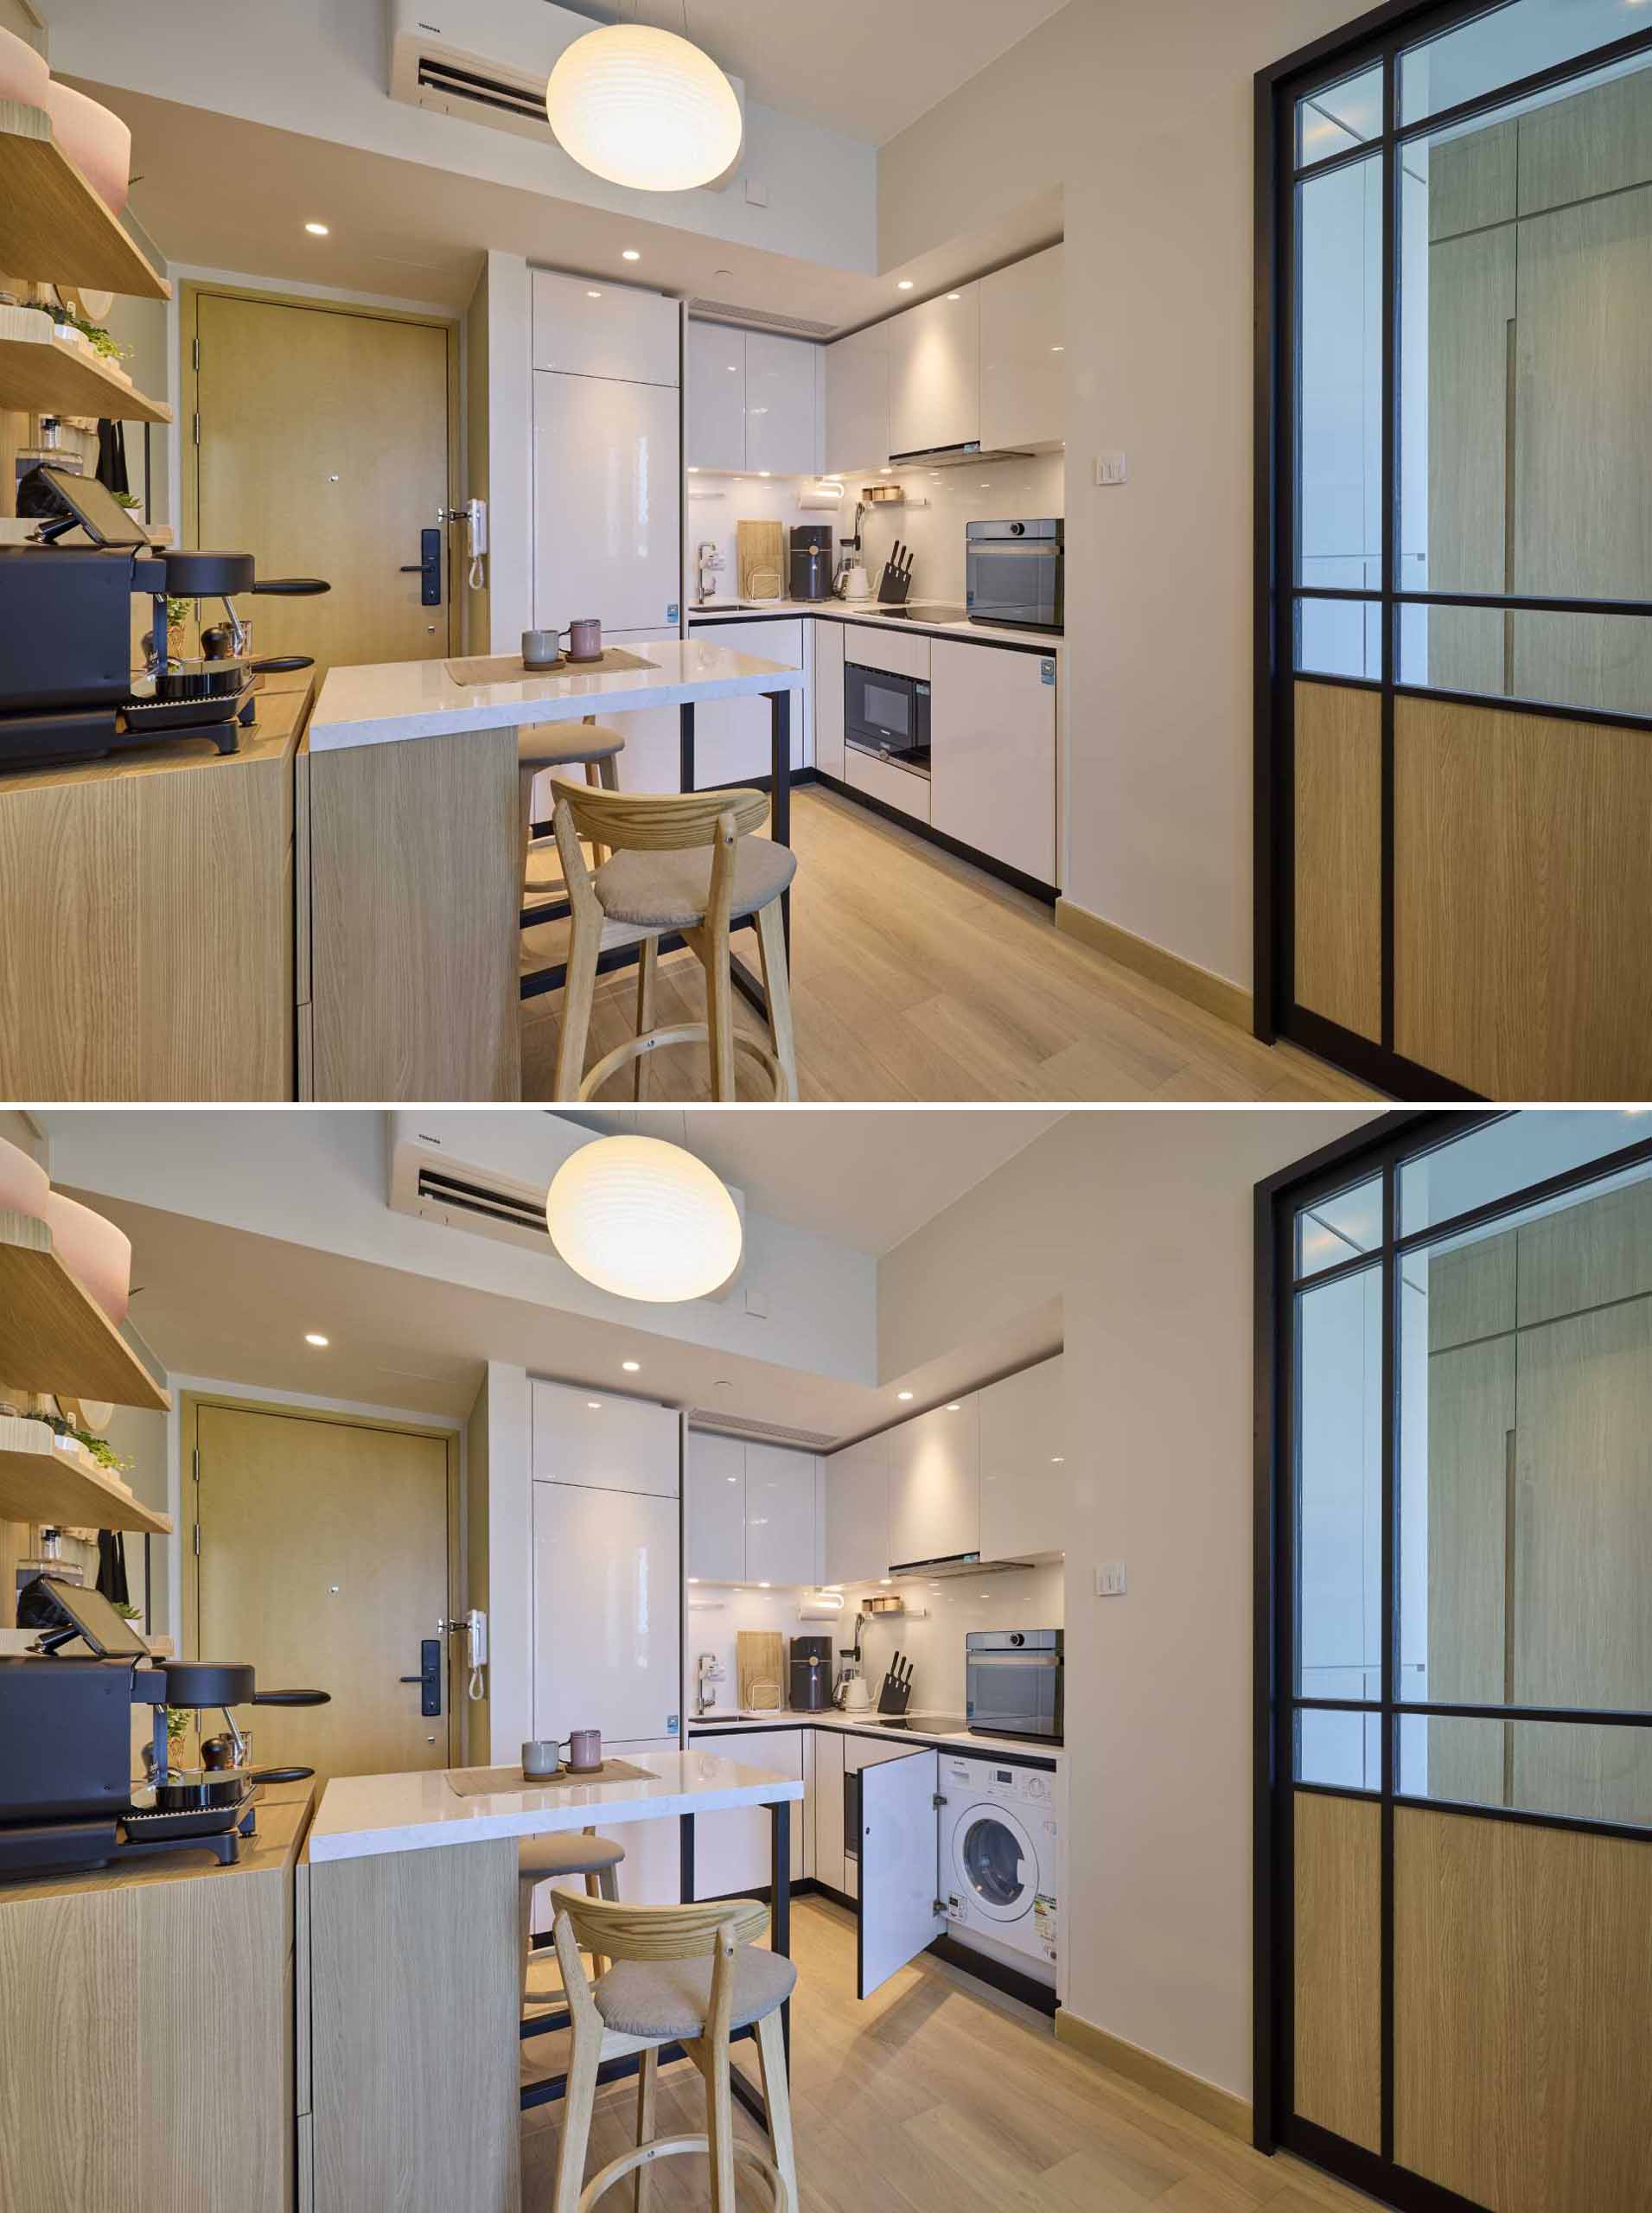 A small island can be moved to expose the washing machine in this kitchen.